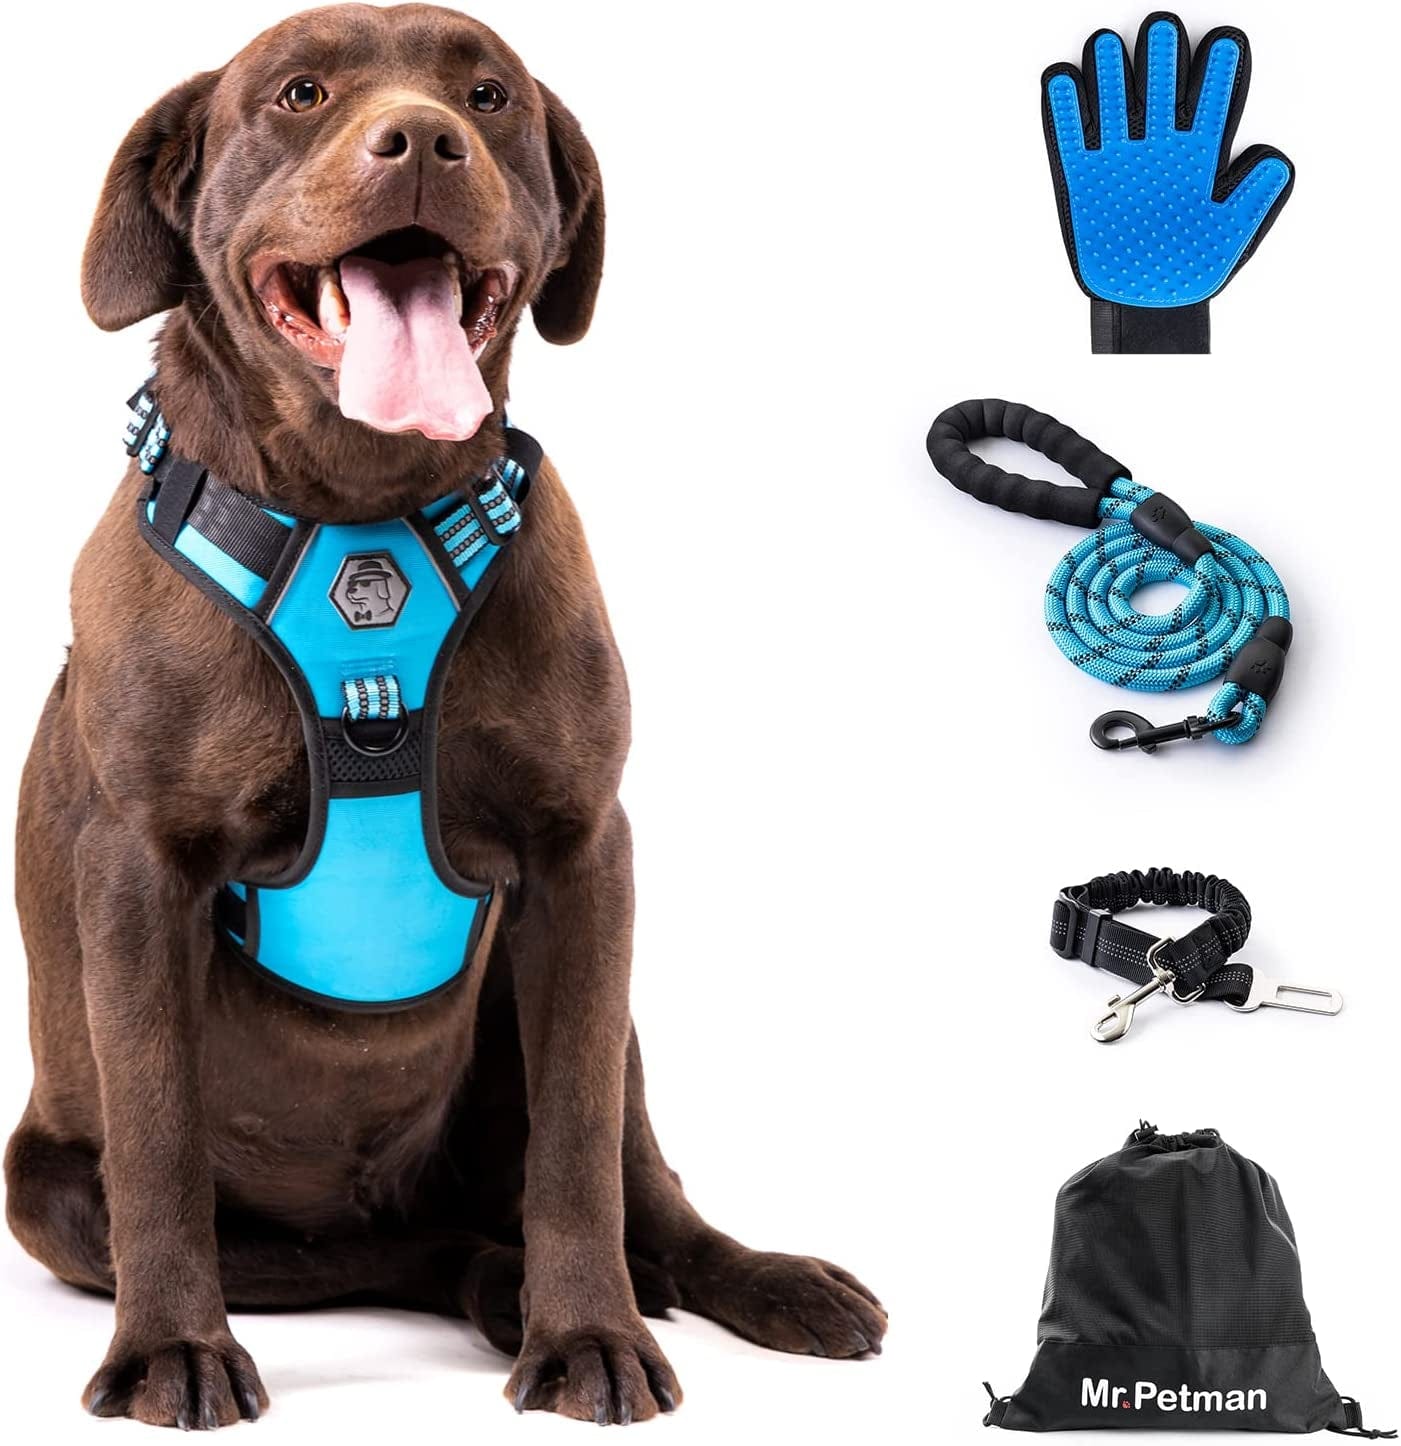 MR. PETMAN No Pull Dog Harness with Leash, Seat Belt, Grooming Glove - No Choke Dog Harness Set for Small Medium Large Dogs- Reflective Adjustable Dog Vest Harnesses with Handle for Walking Training Animals & Pet Supplies > Pet Supplies > Dog Supplies > Dog Apparel Mr. Petman Sky Blue X-Large 